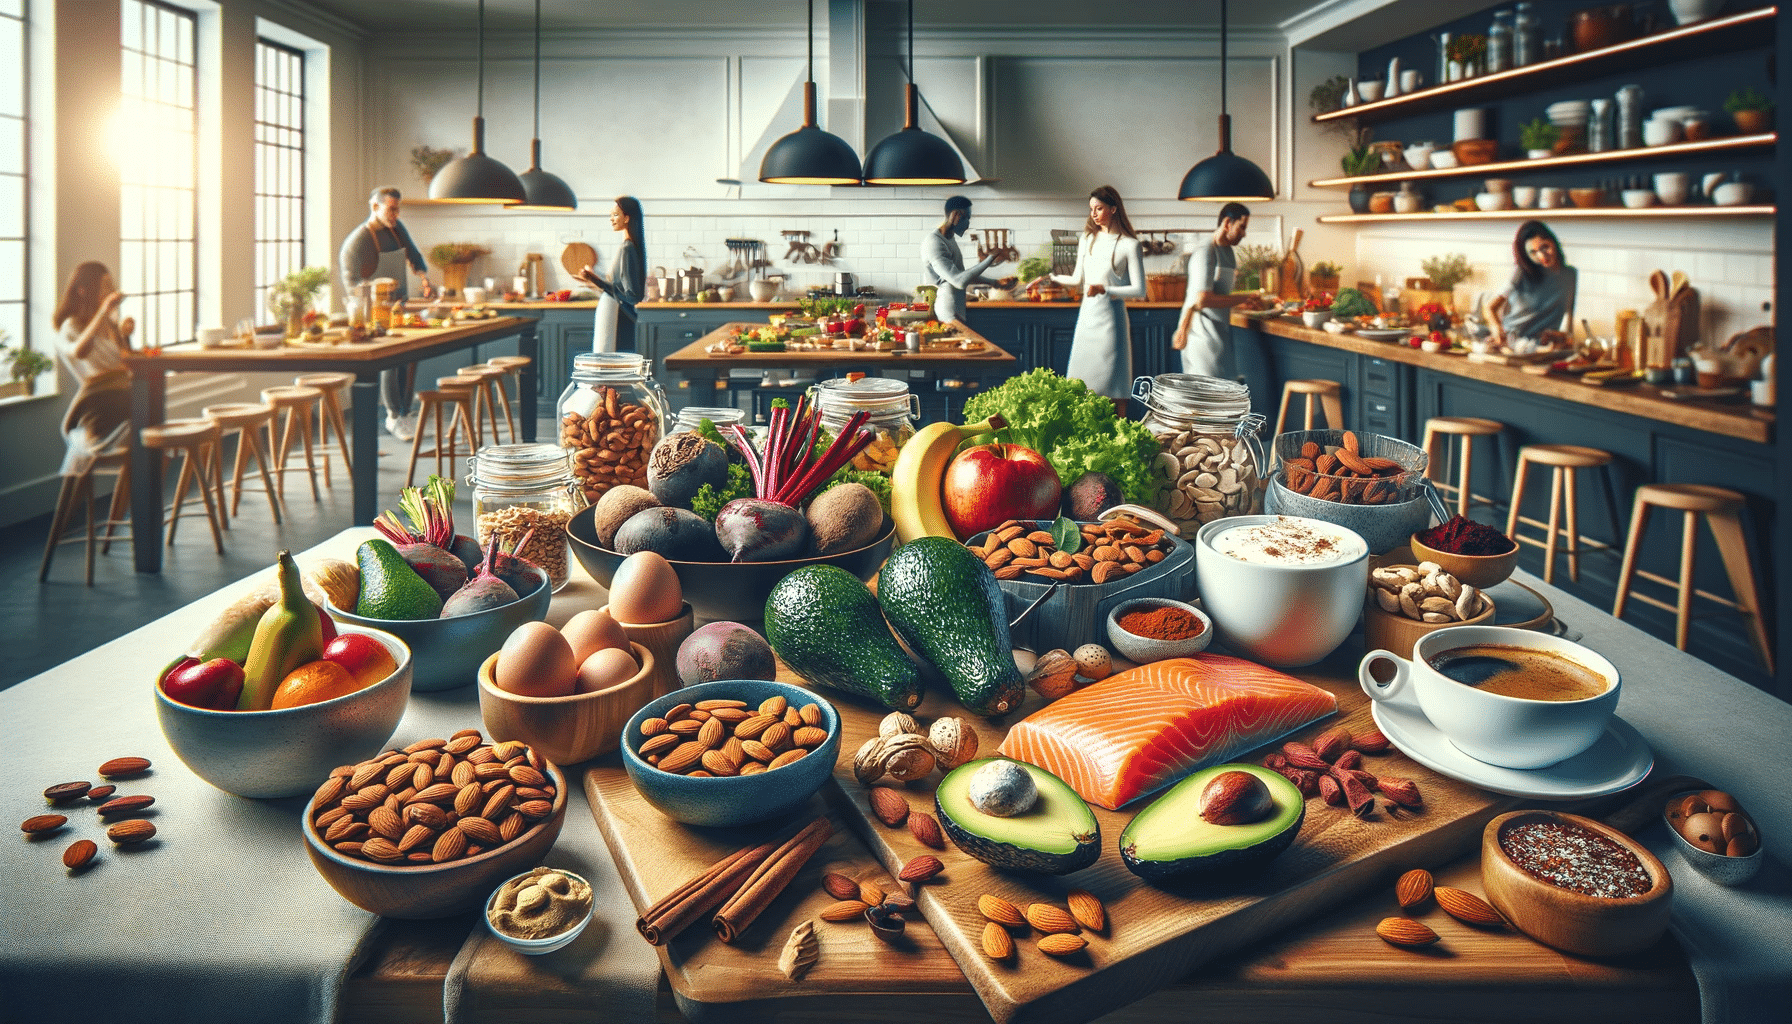 Horizontal image set in a luxurious gourmet kitchen featuring specific nutritious foods for energy. The scene includes vibrant and healthy foods such 2